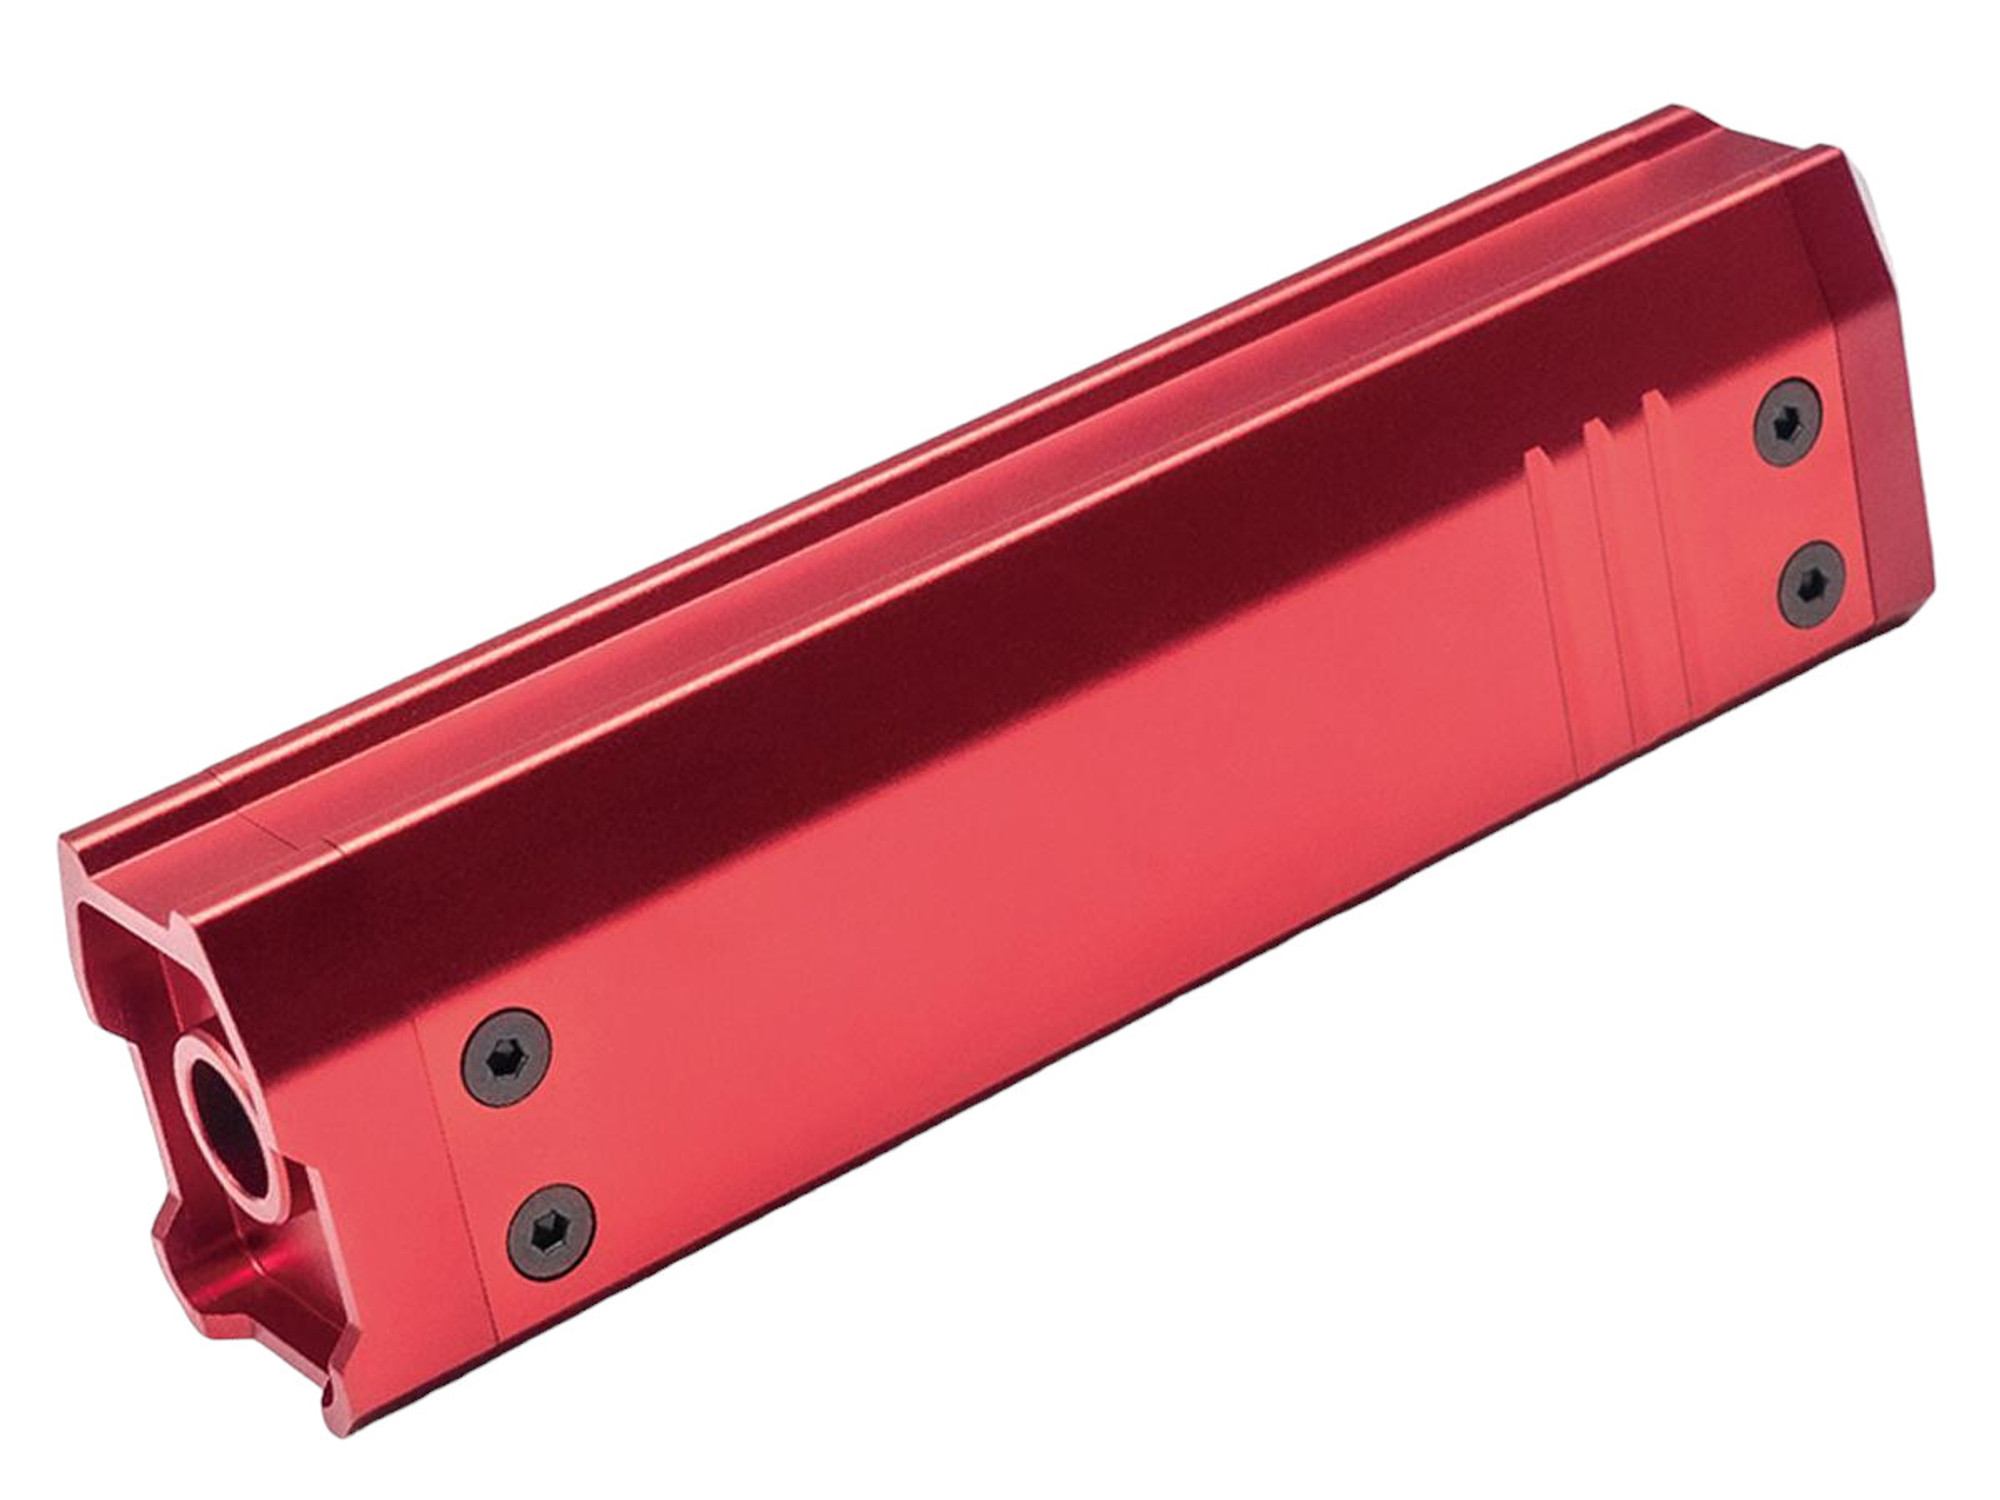 ASG 14mm Negative Barrel Extension for AAP-01 Gas Blowback Airsoft Pistols (Model: Long / Red)